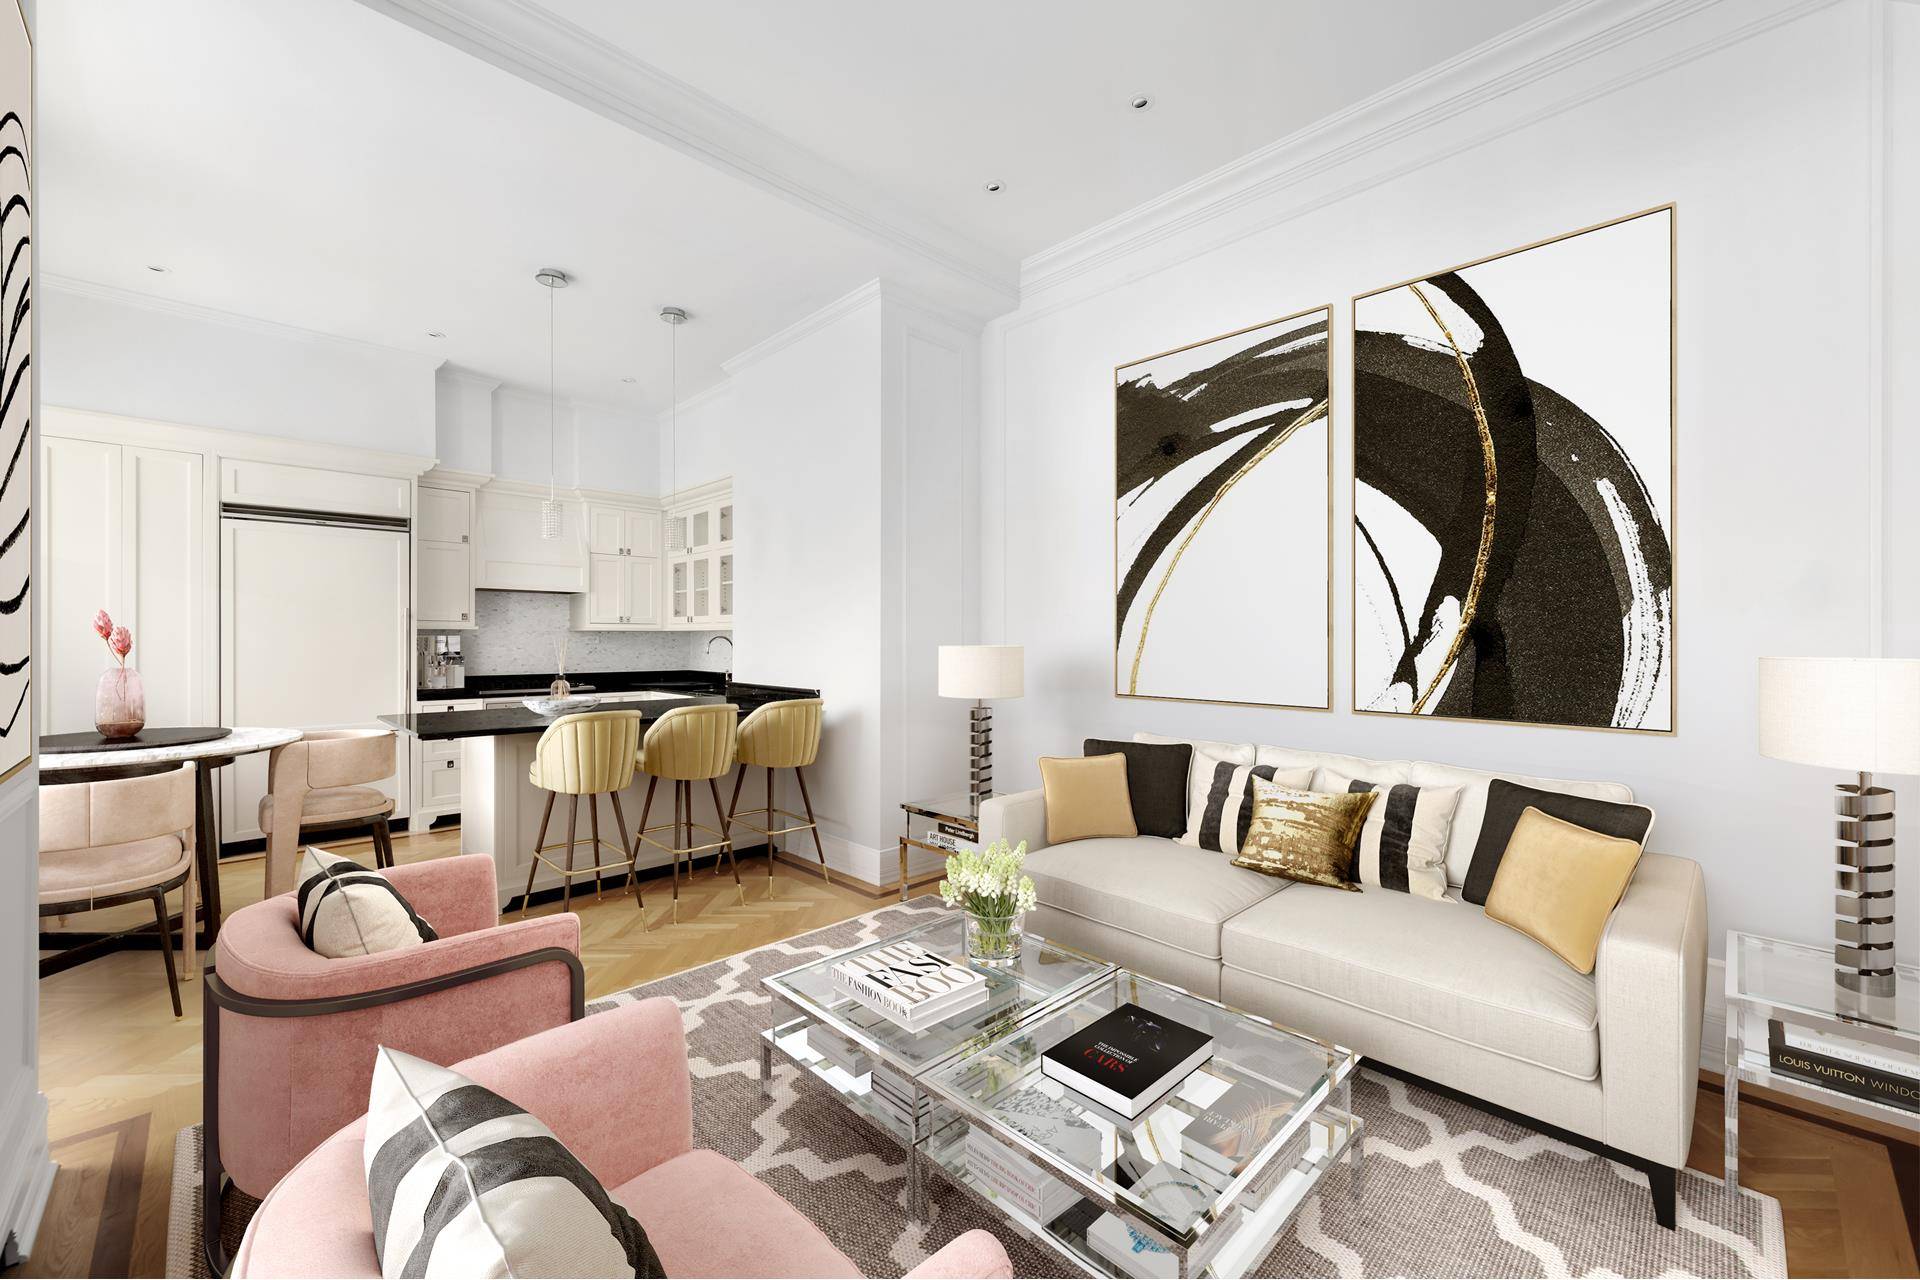 Welcome to apartment 608 at the prestigious Plaza Residences, a special opportunity to own a piece of New York City's iconic and storied history.